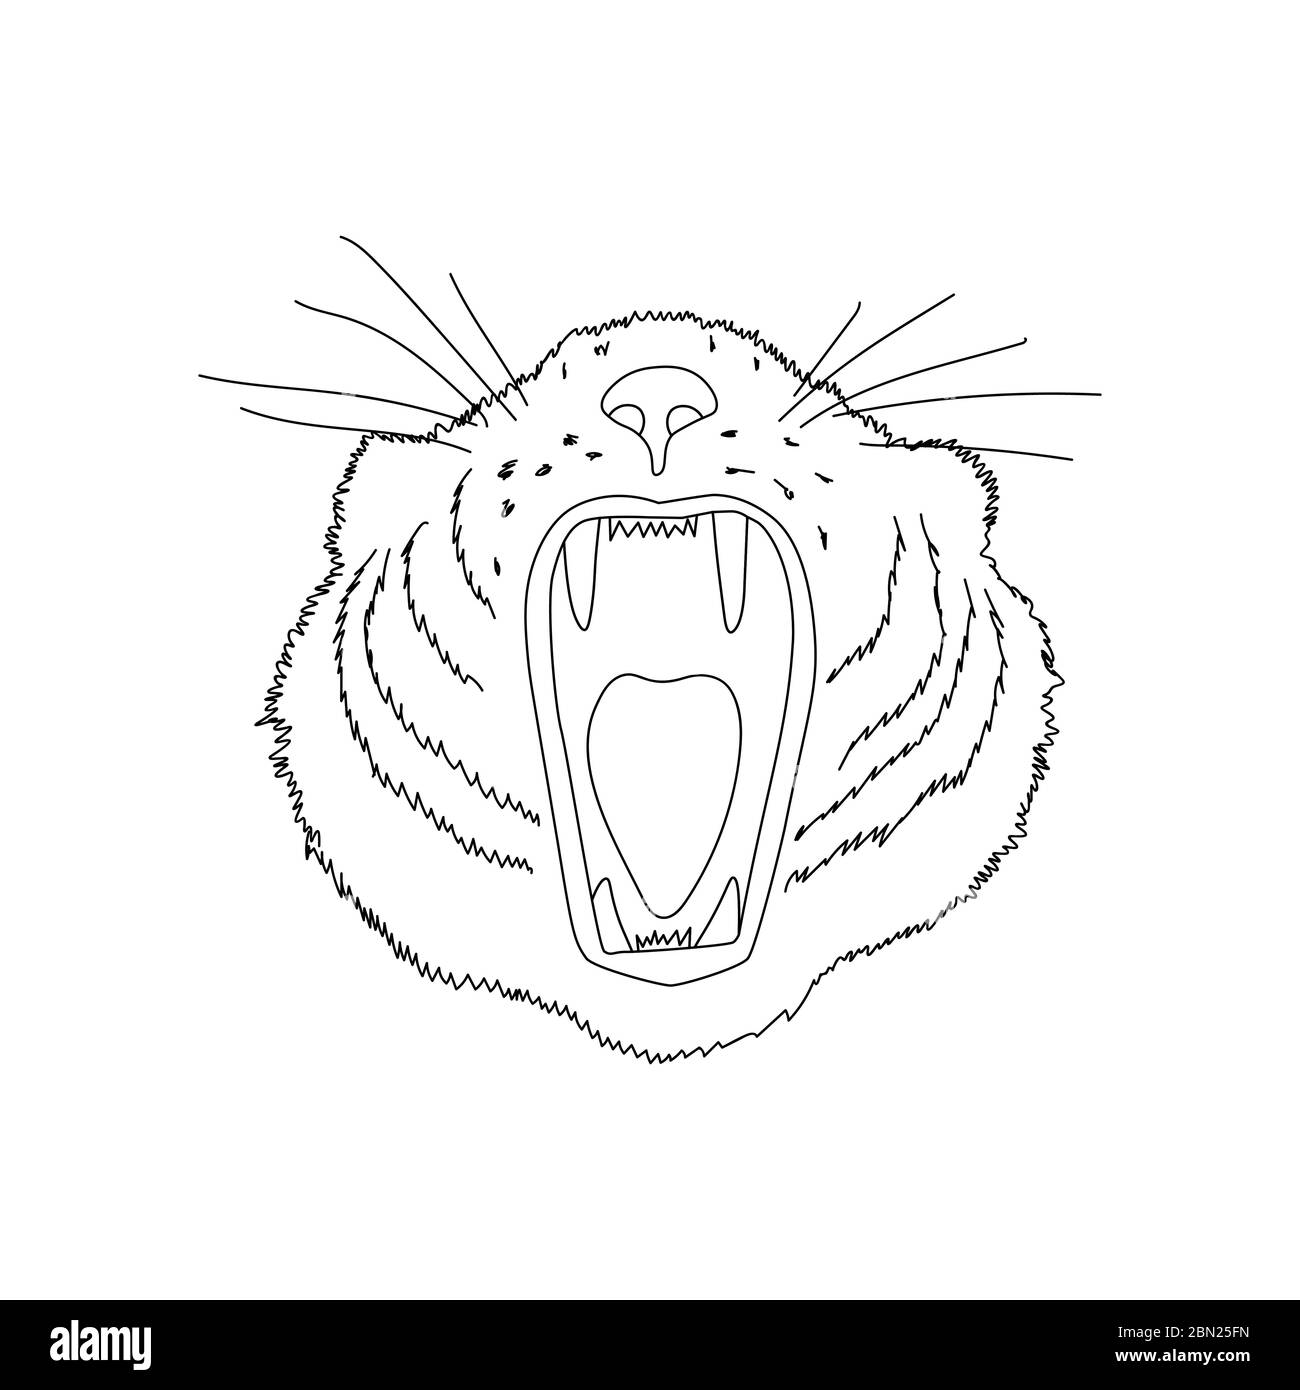 Tiger's head. Line art doodle sketch. Black outline on white background. Background can be used in greeting cards, posters, flyers, banners, logos etc. Vector illustration. EPS10 Stock Vector